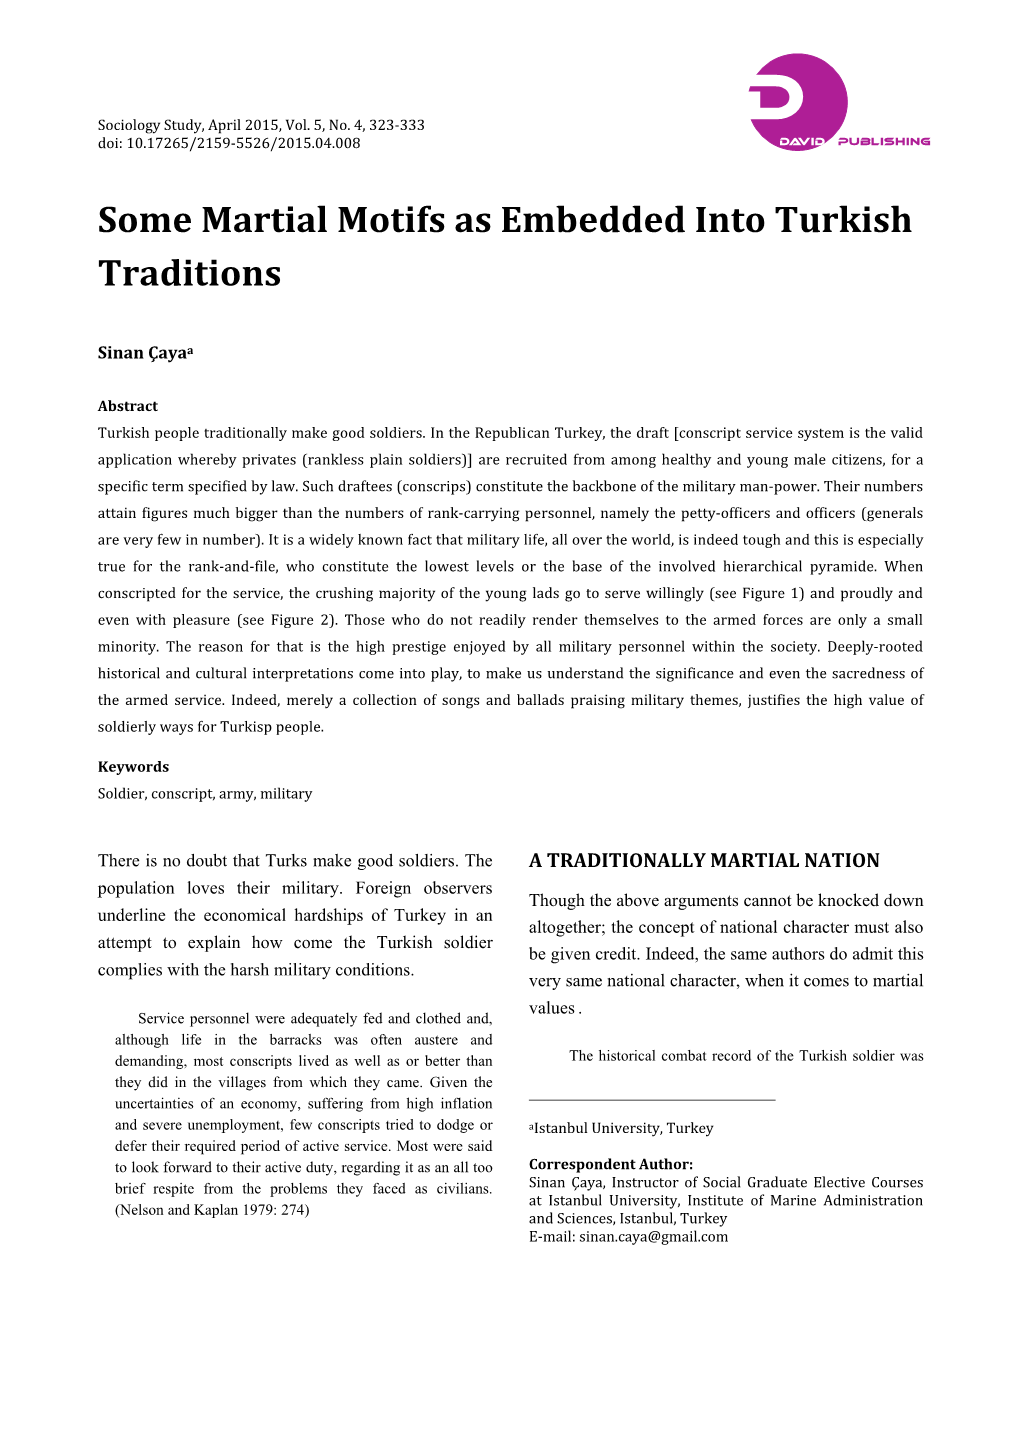 Some Martial Motifs As Embedded Into Turkish Traditions